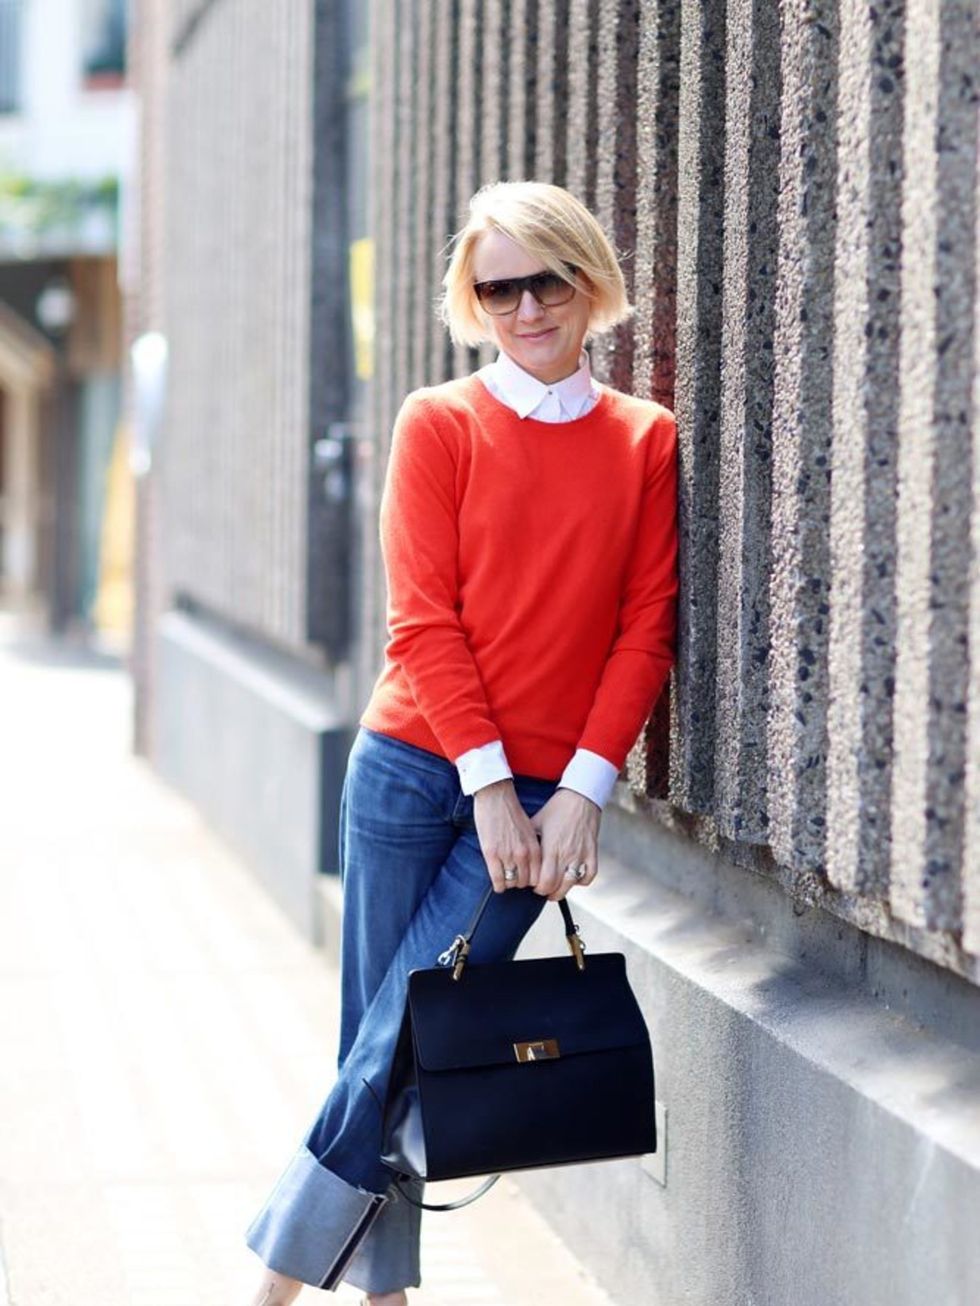 <p>Lorraine Candy, Editor-In-Chief</p>

<p>Marks & Spencer jumper and shoes, Paul Smith shirt, MiH jeans, Balenciaga bag, Bobbi Brown sunglasses</p>